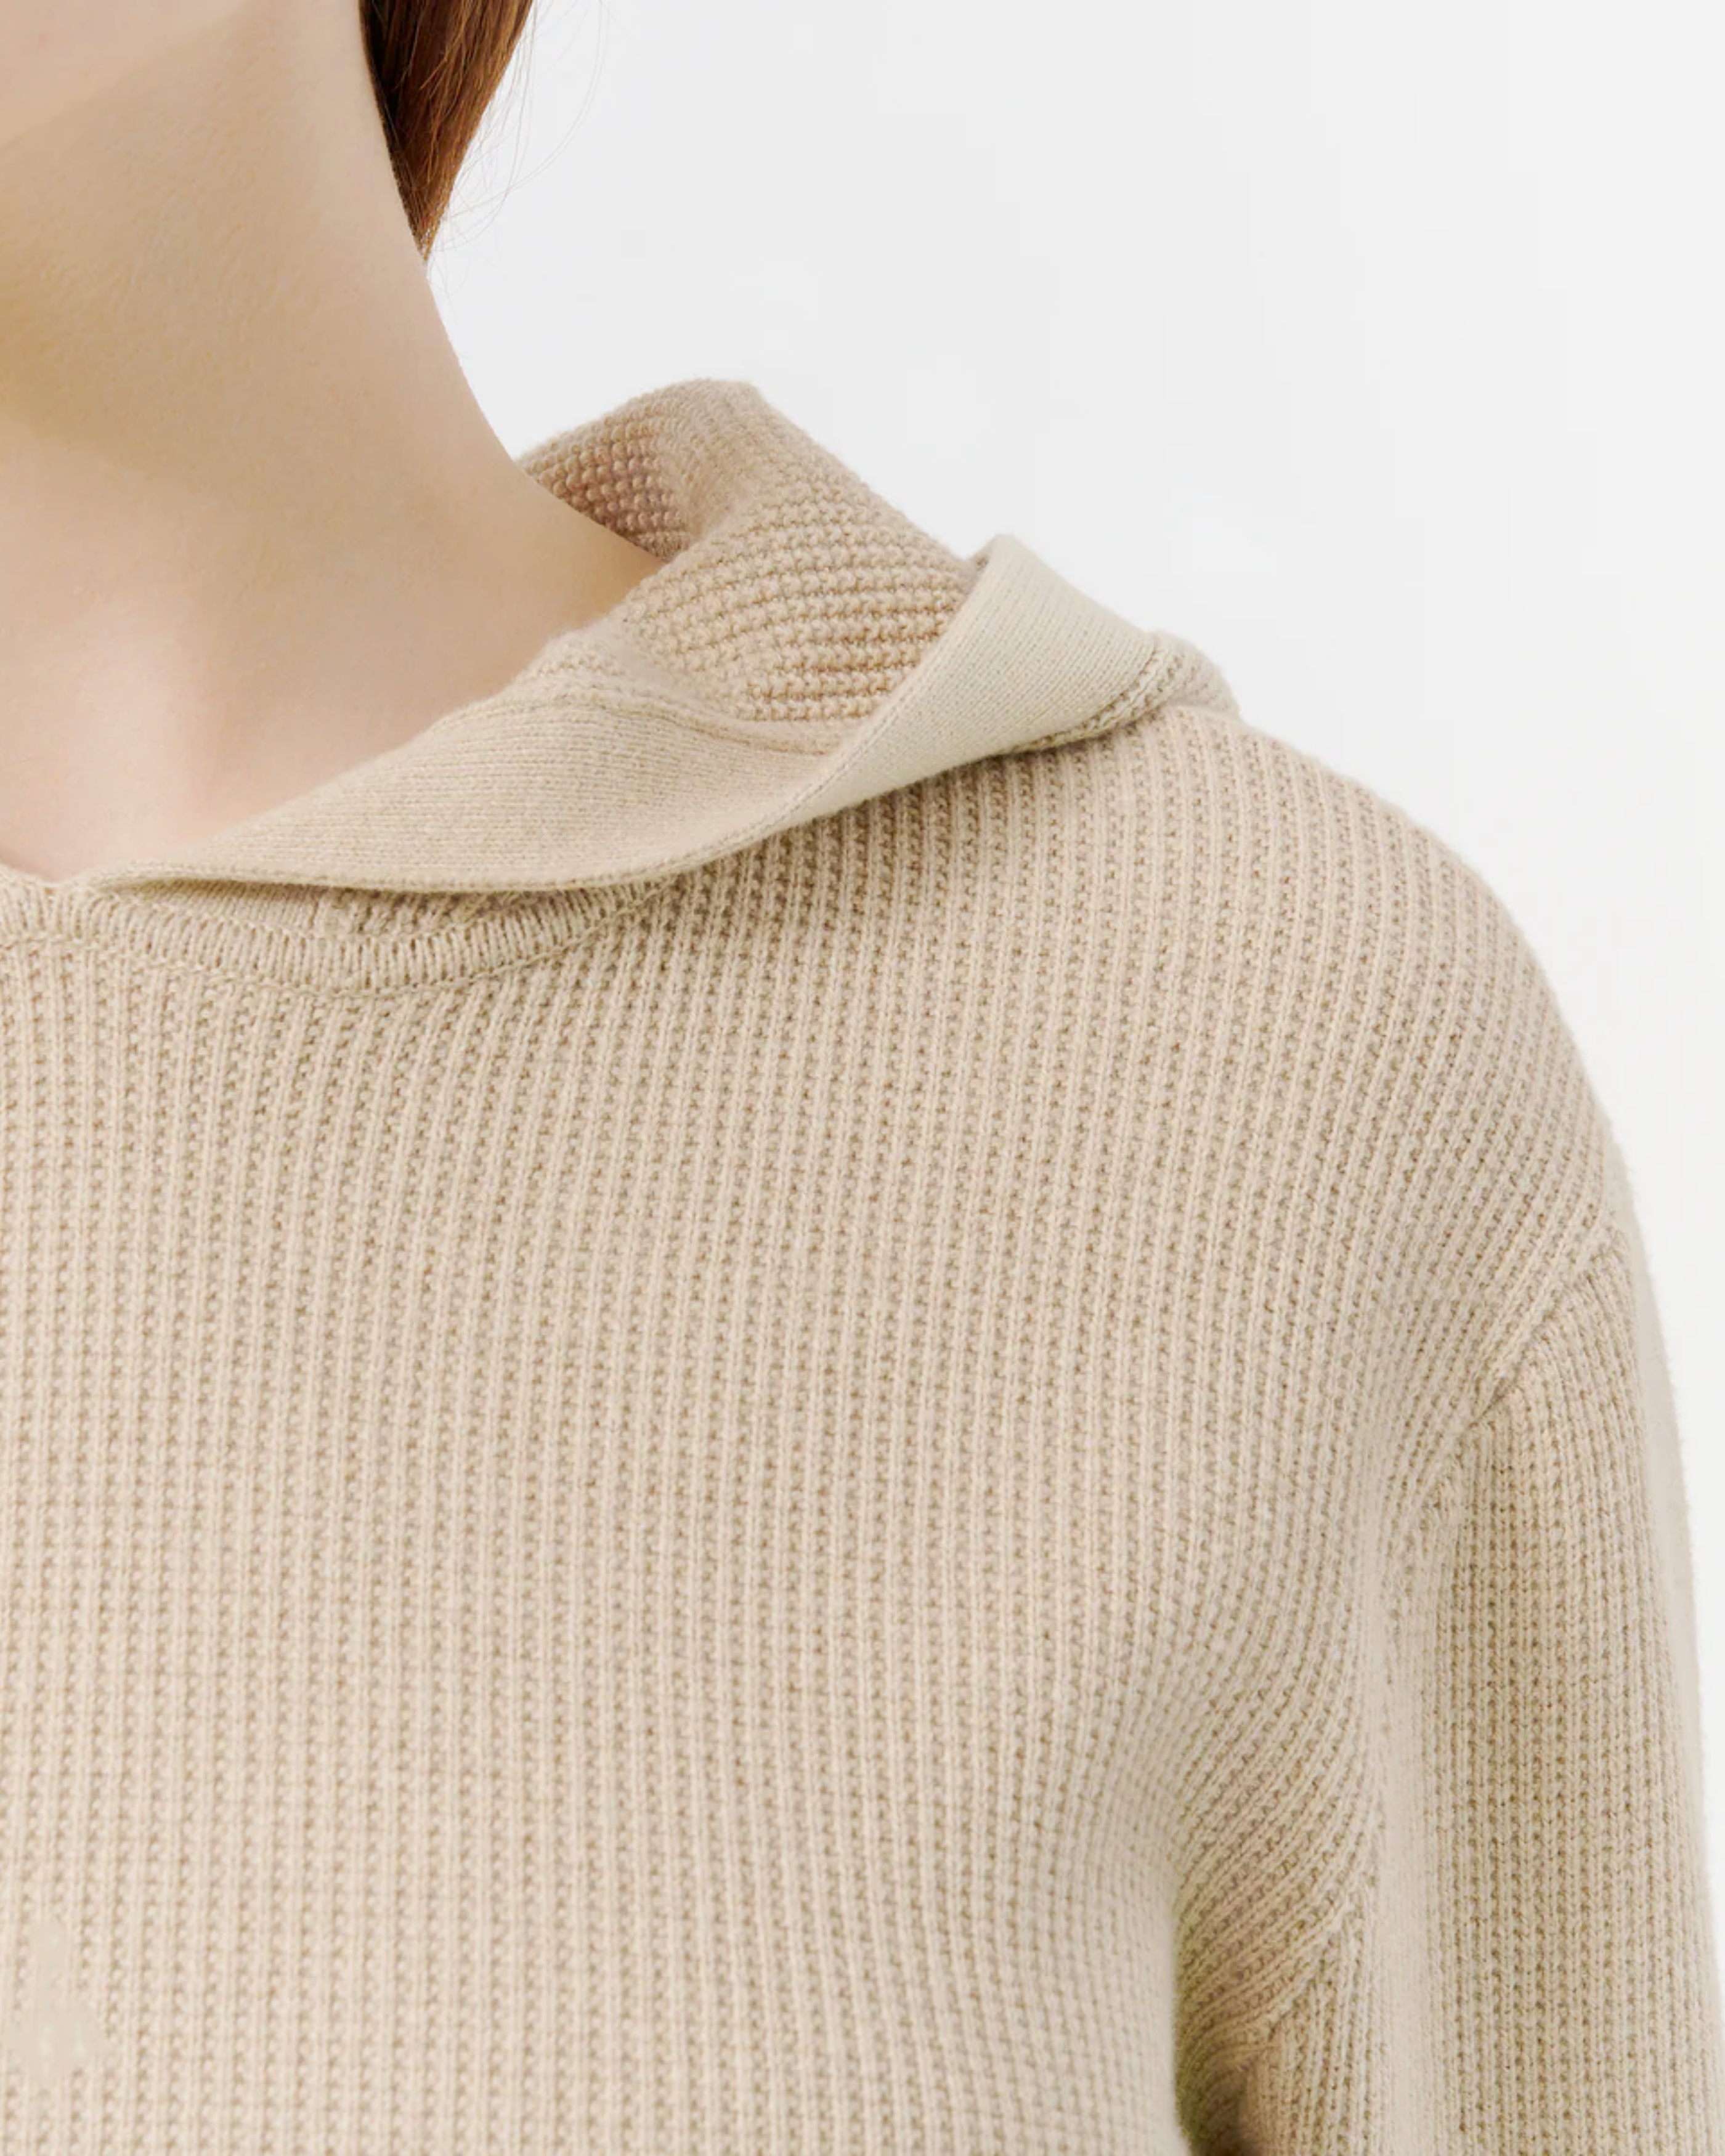 ATM Cotton Cashmere Long Sleeve Hoodie in Soft Fawn